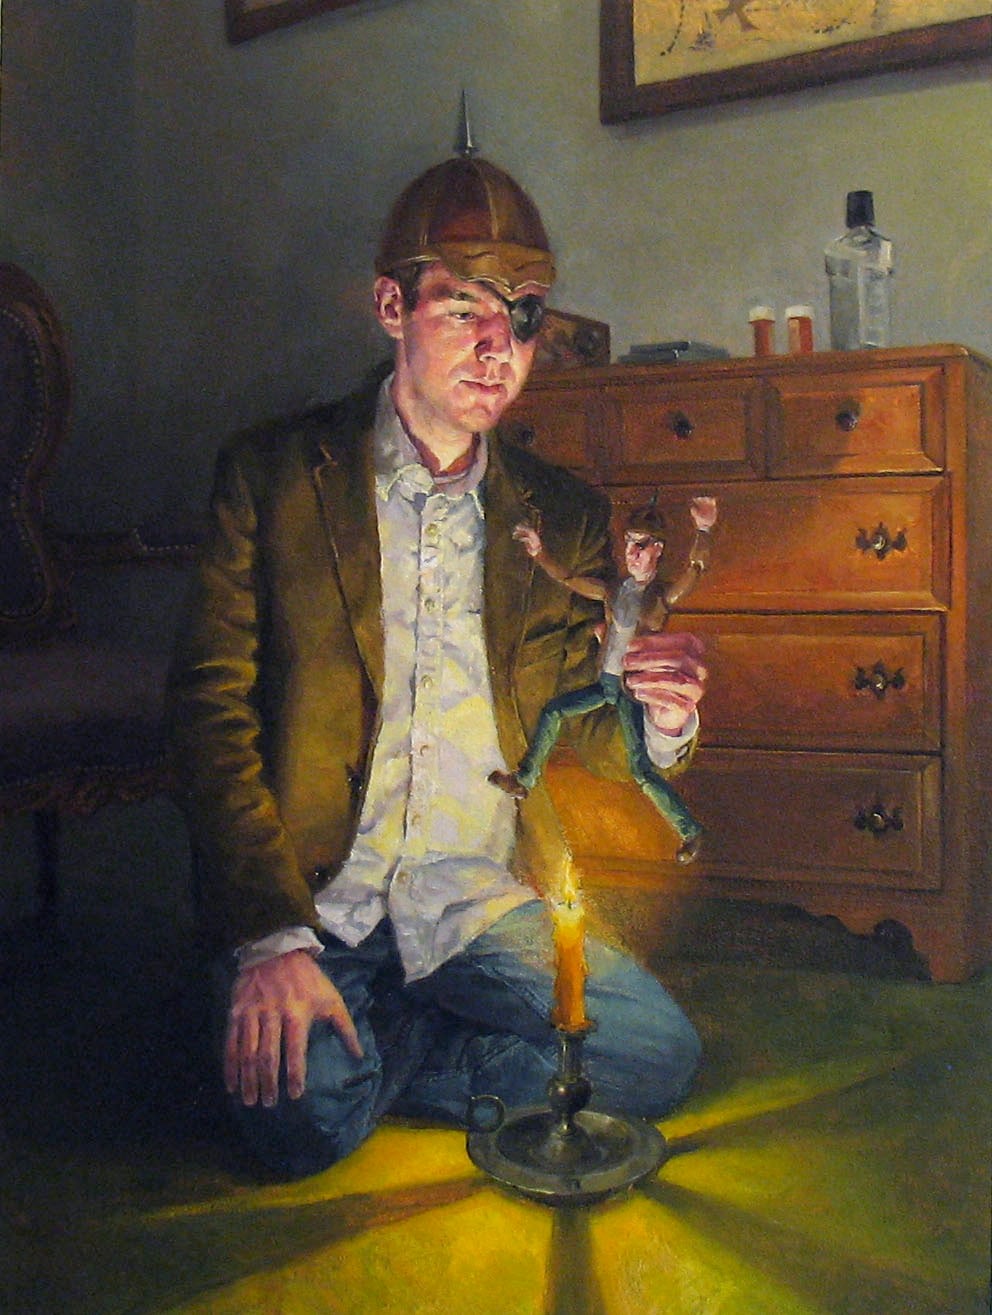 NATHANIEL ROGERS Nimble Jack 2009, oil on panel, 8 x 6 inches.